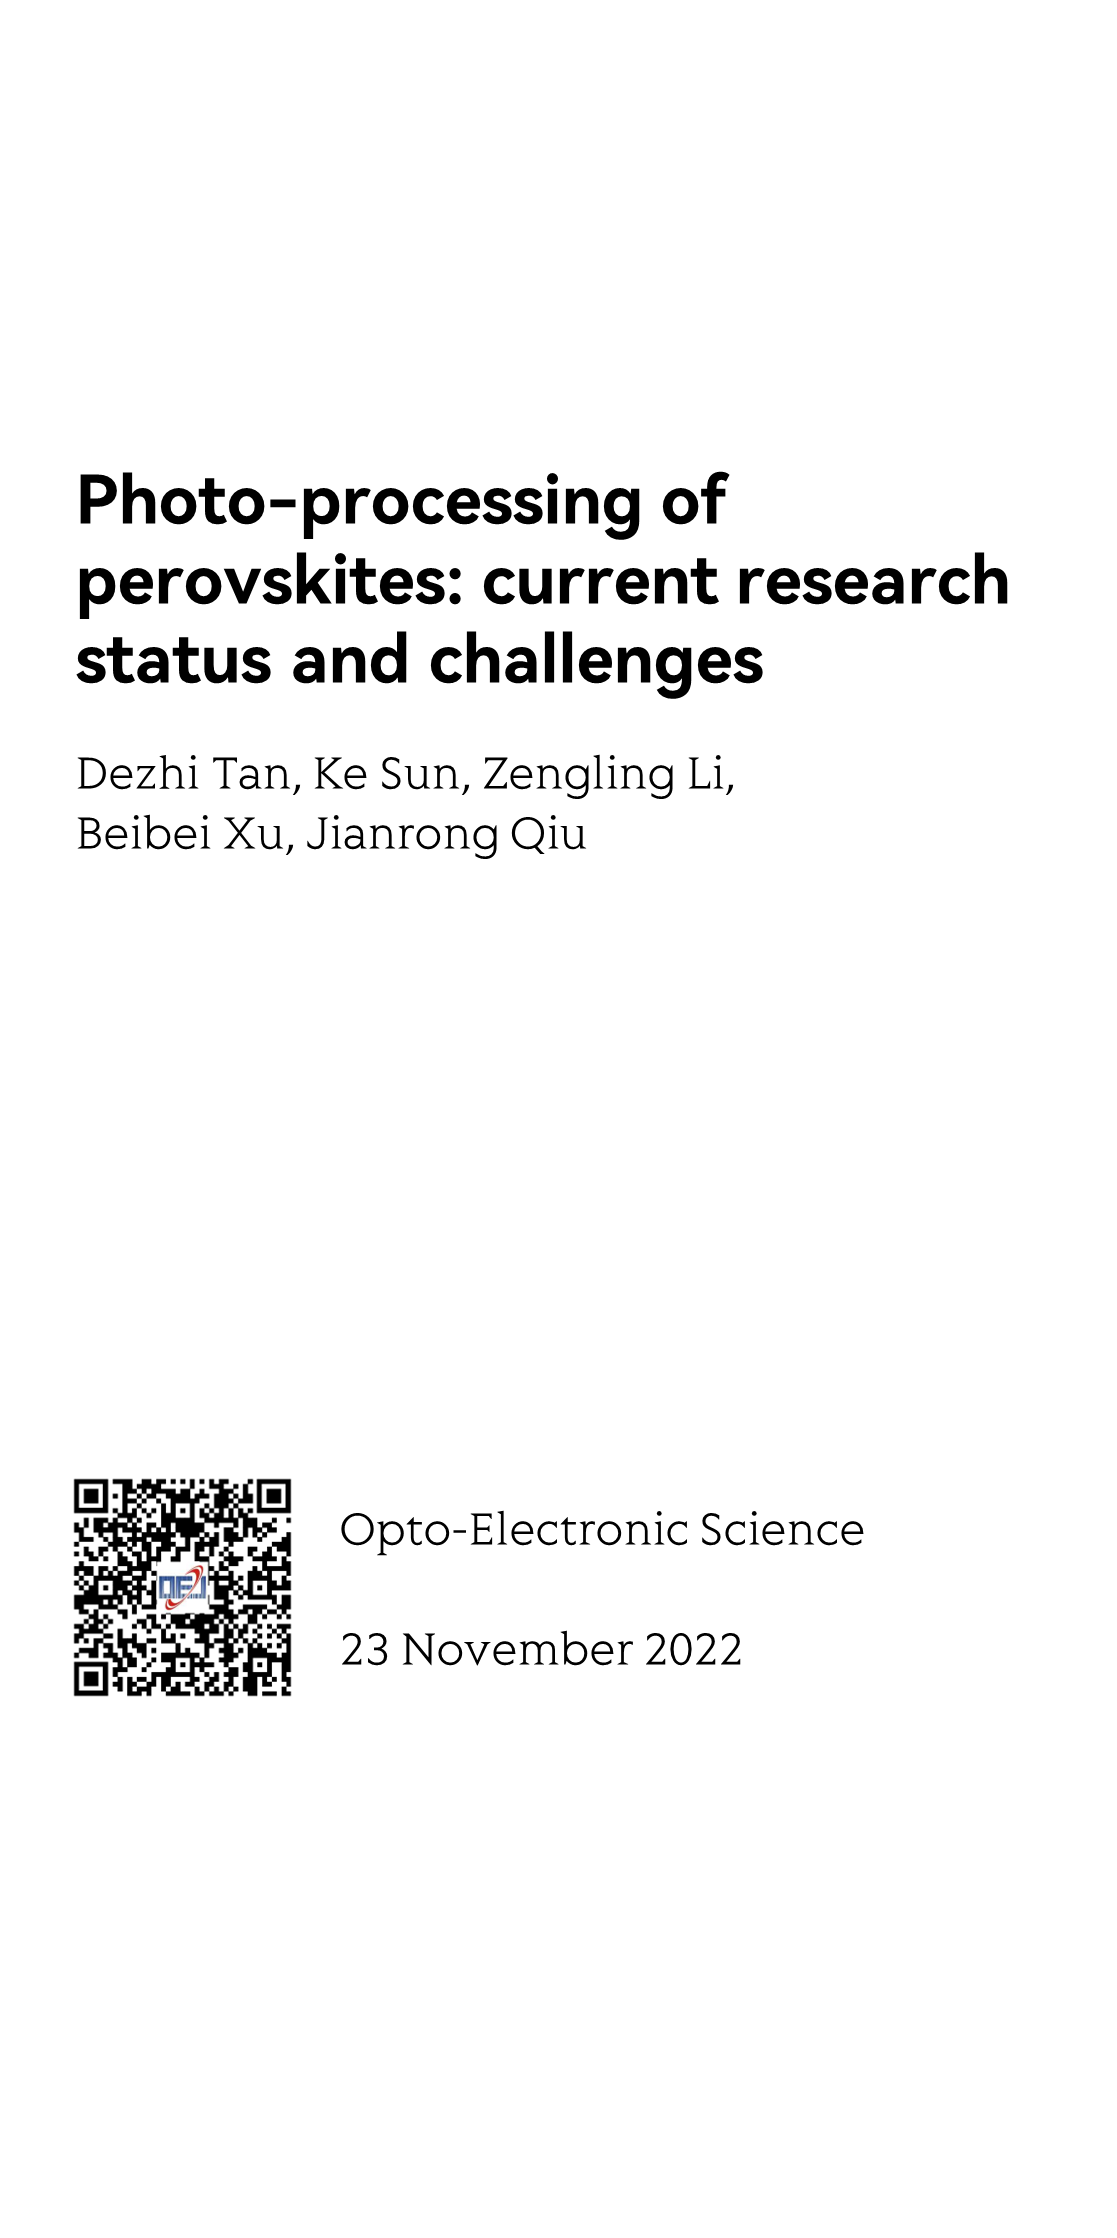 Photo-processing of perovskites: current research status and challenges_1